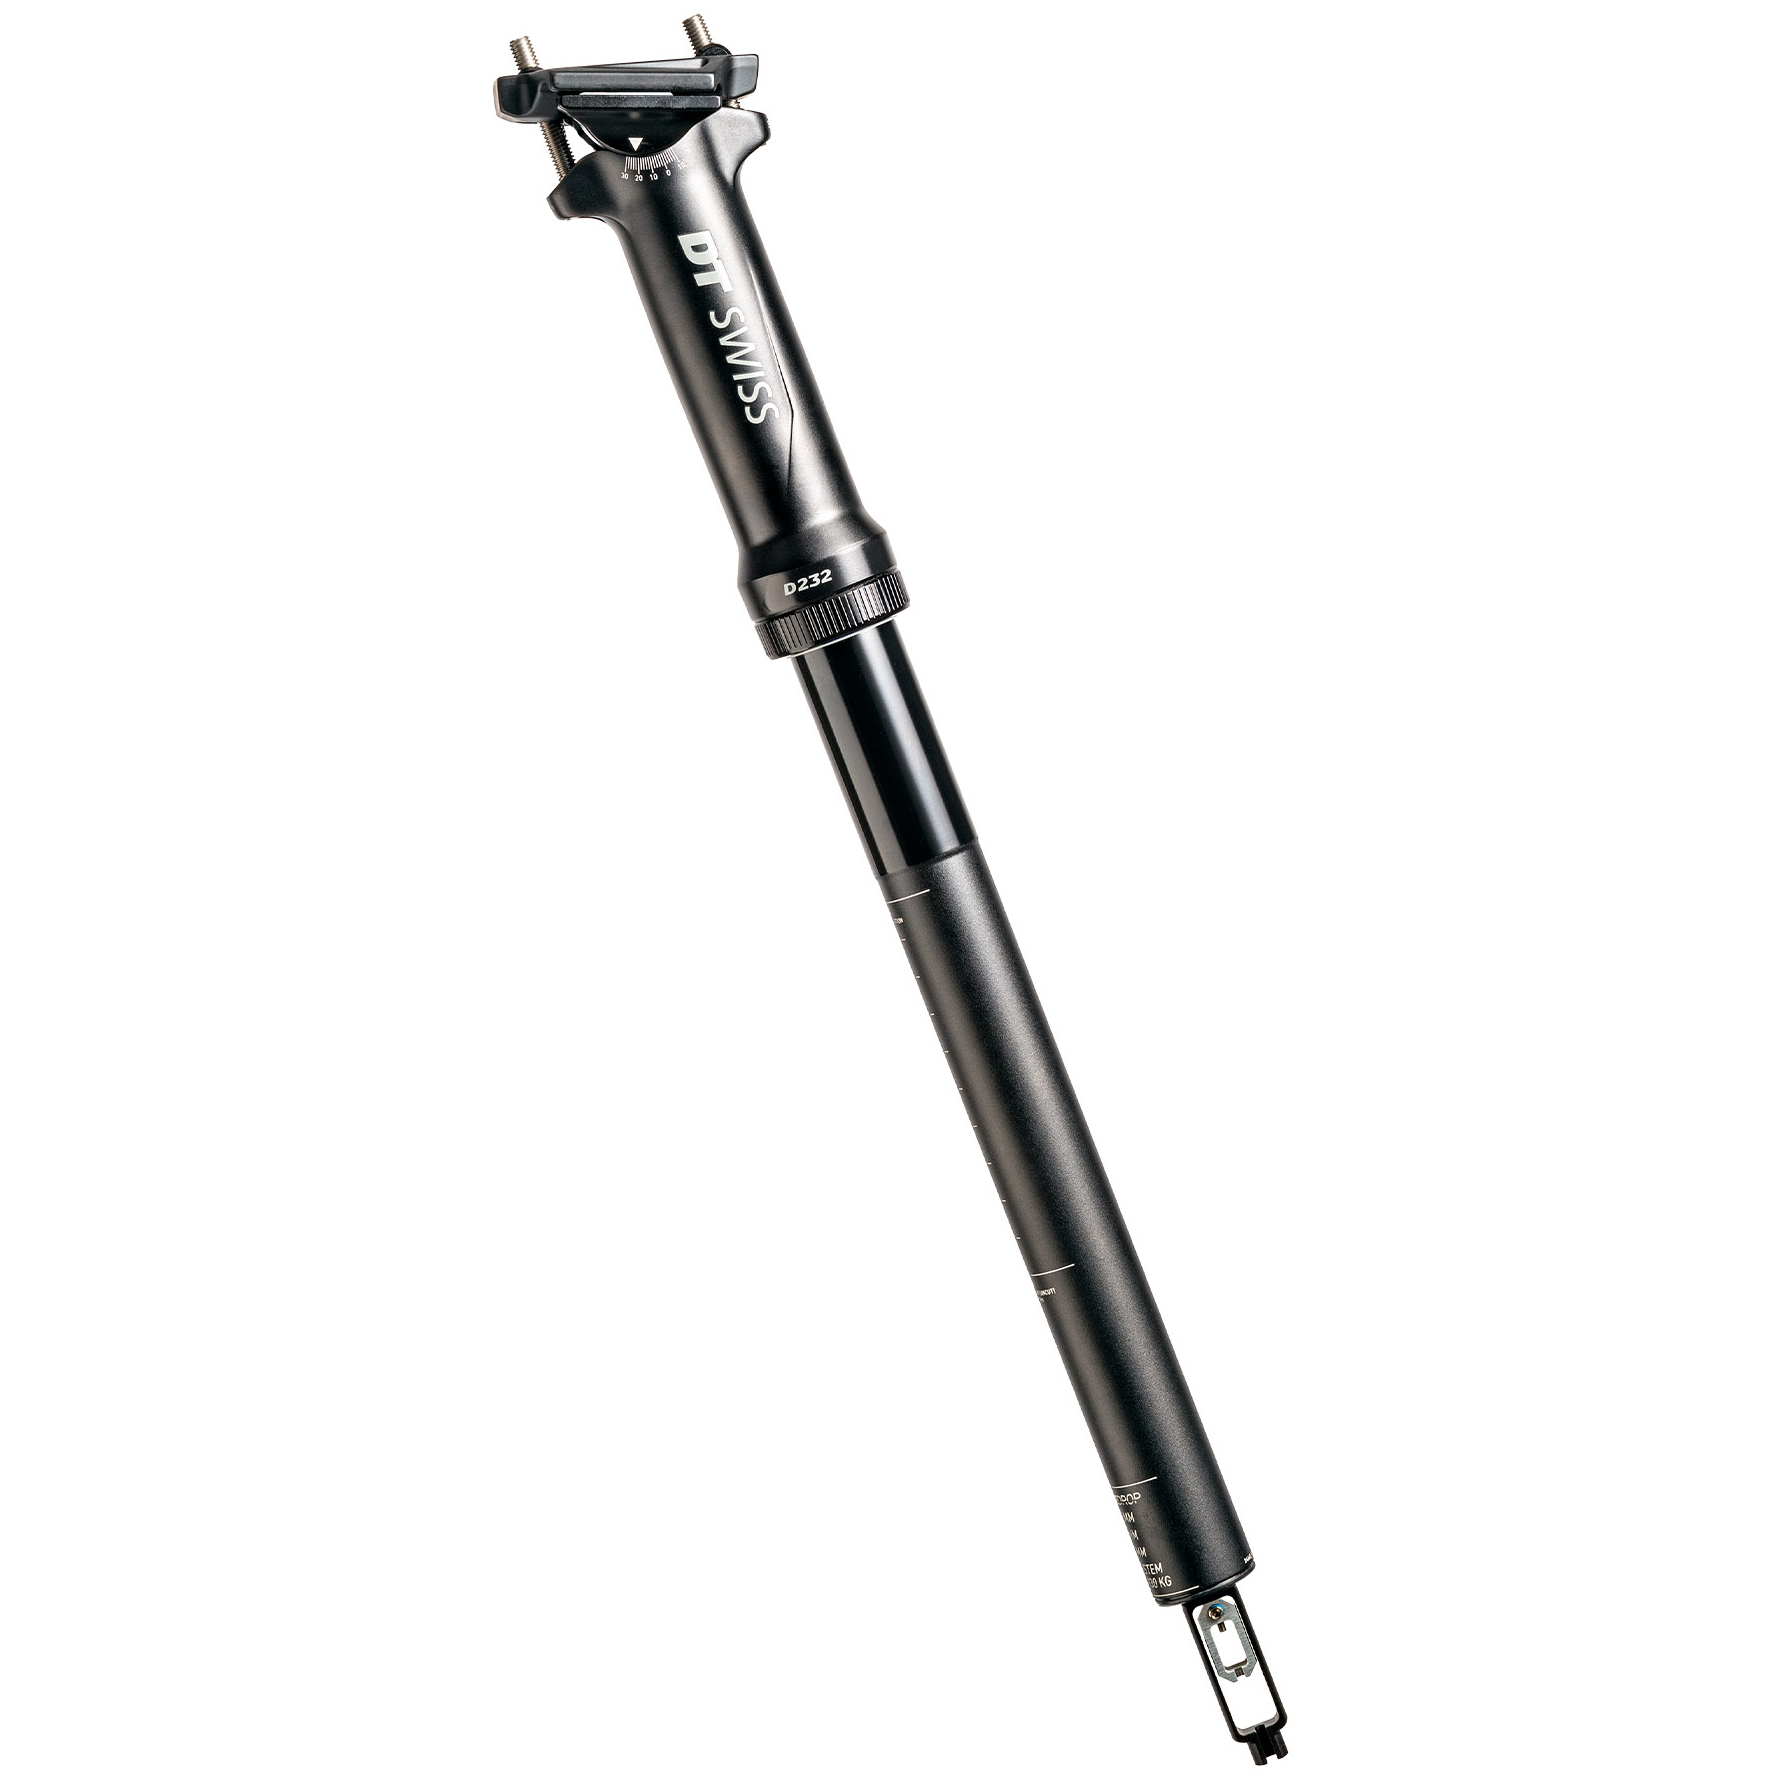 Picture of DT Swiss D 232 Alu Dropper Seatpost - 60mm Travel - 27.2mm - L1 Trigger